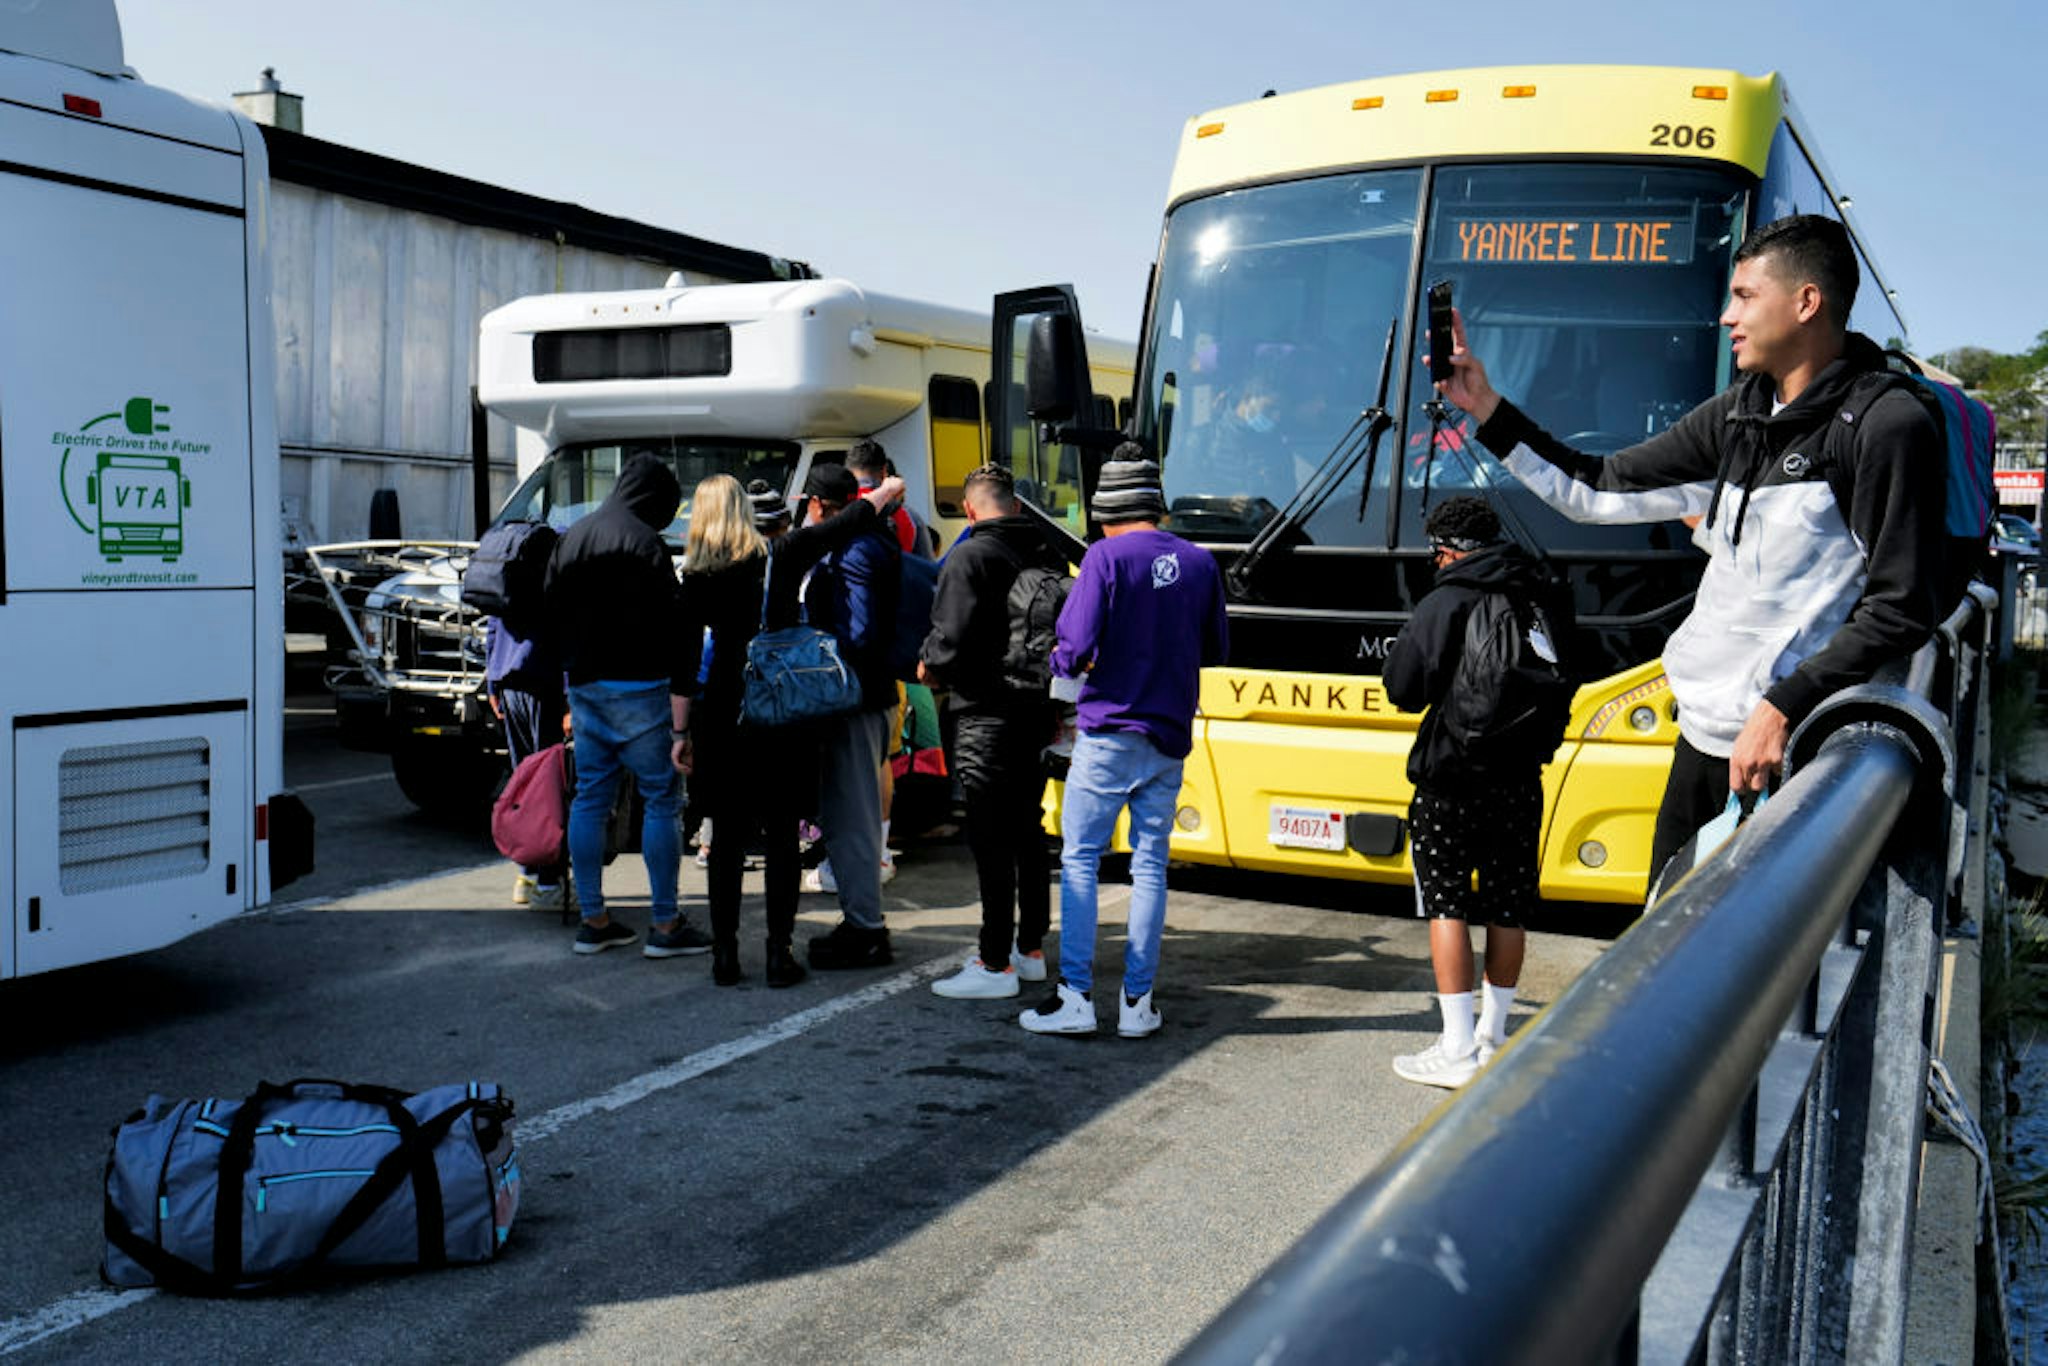 Martha's Vineyard, MA - September 16: Venezuelan migrants gather at the Vineyard Haven ferry terminal in Marthas Vineyard. The group was transported to Joint Base Cape Cod in Buzzards Bay. (Photo by Carlin Stiehl for The Boston Globe via Getty Images)